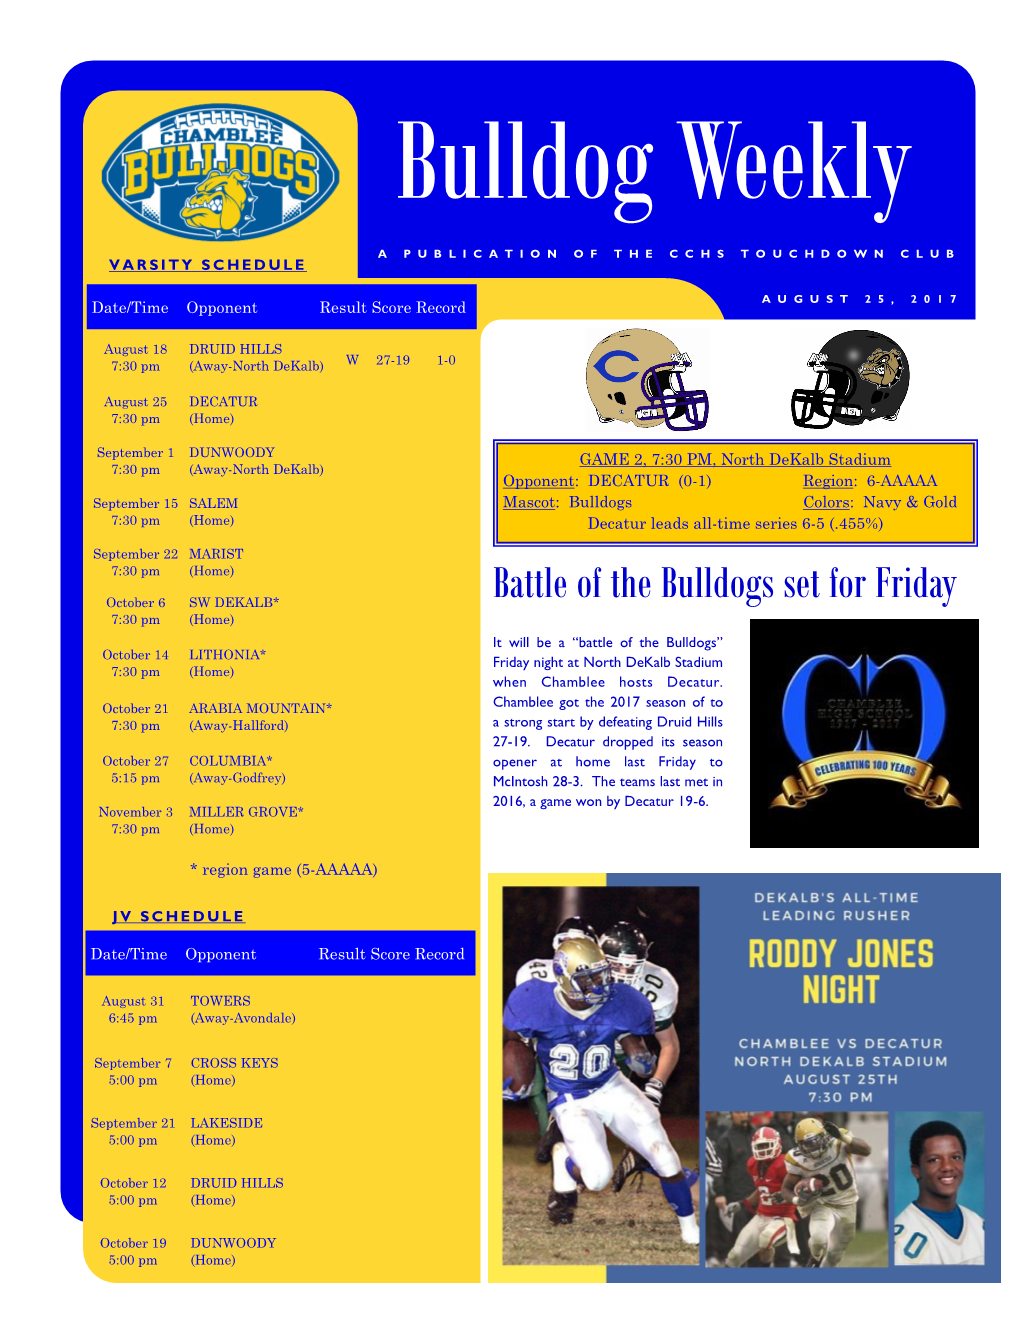 Battle of the Bulldogs Set for Friday